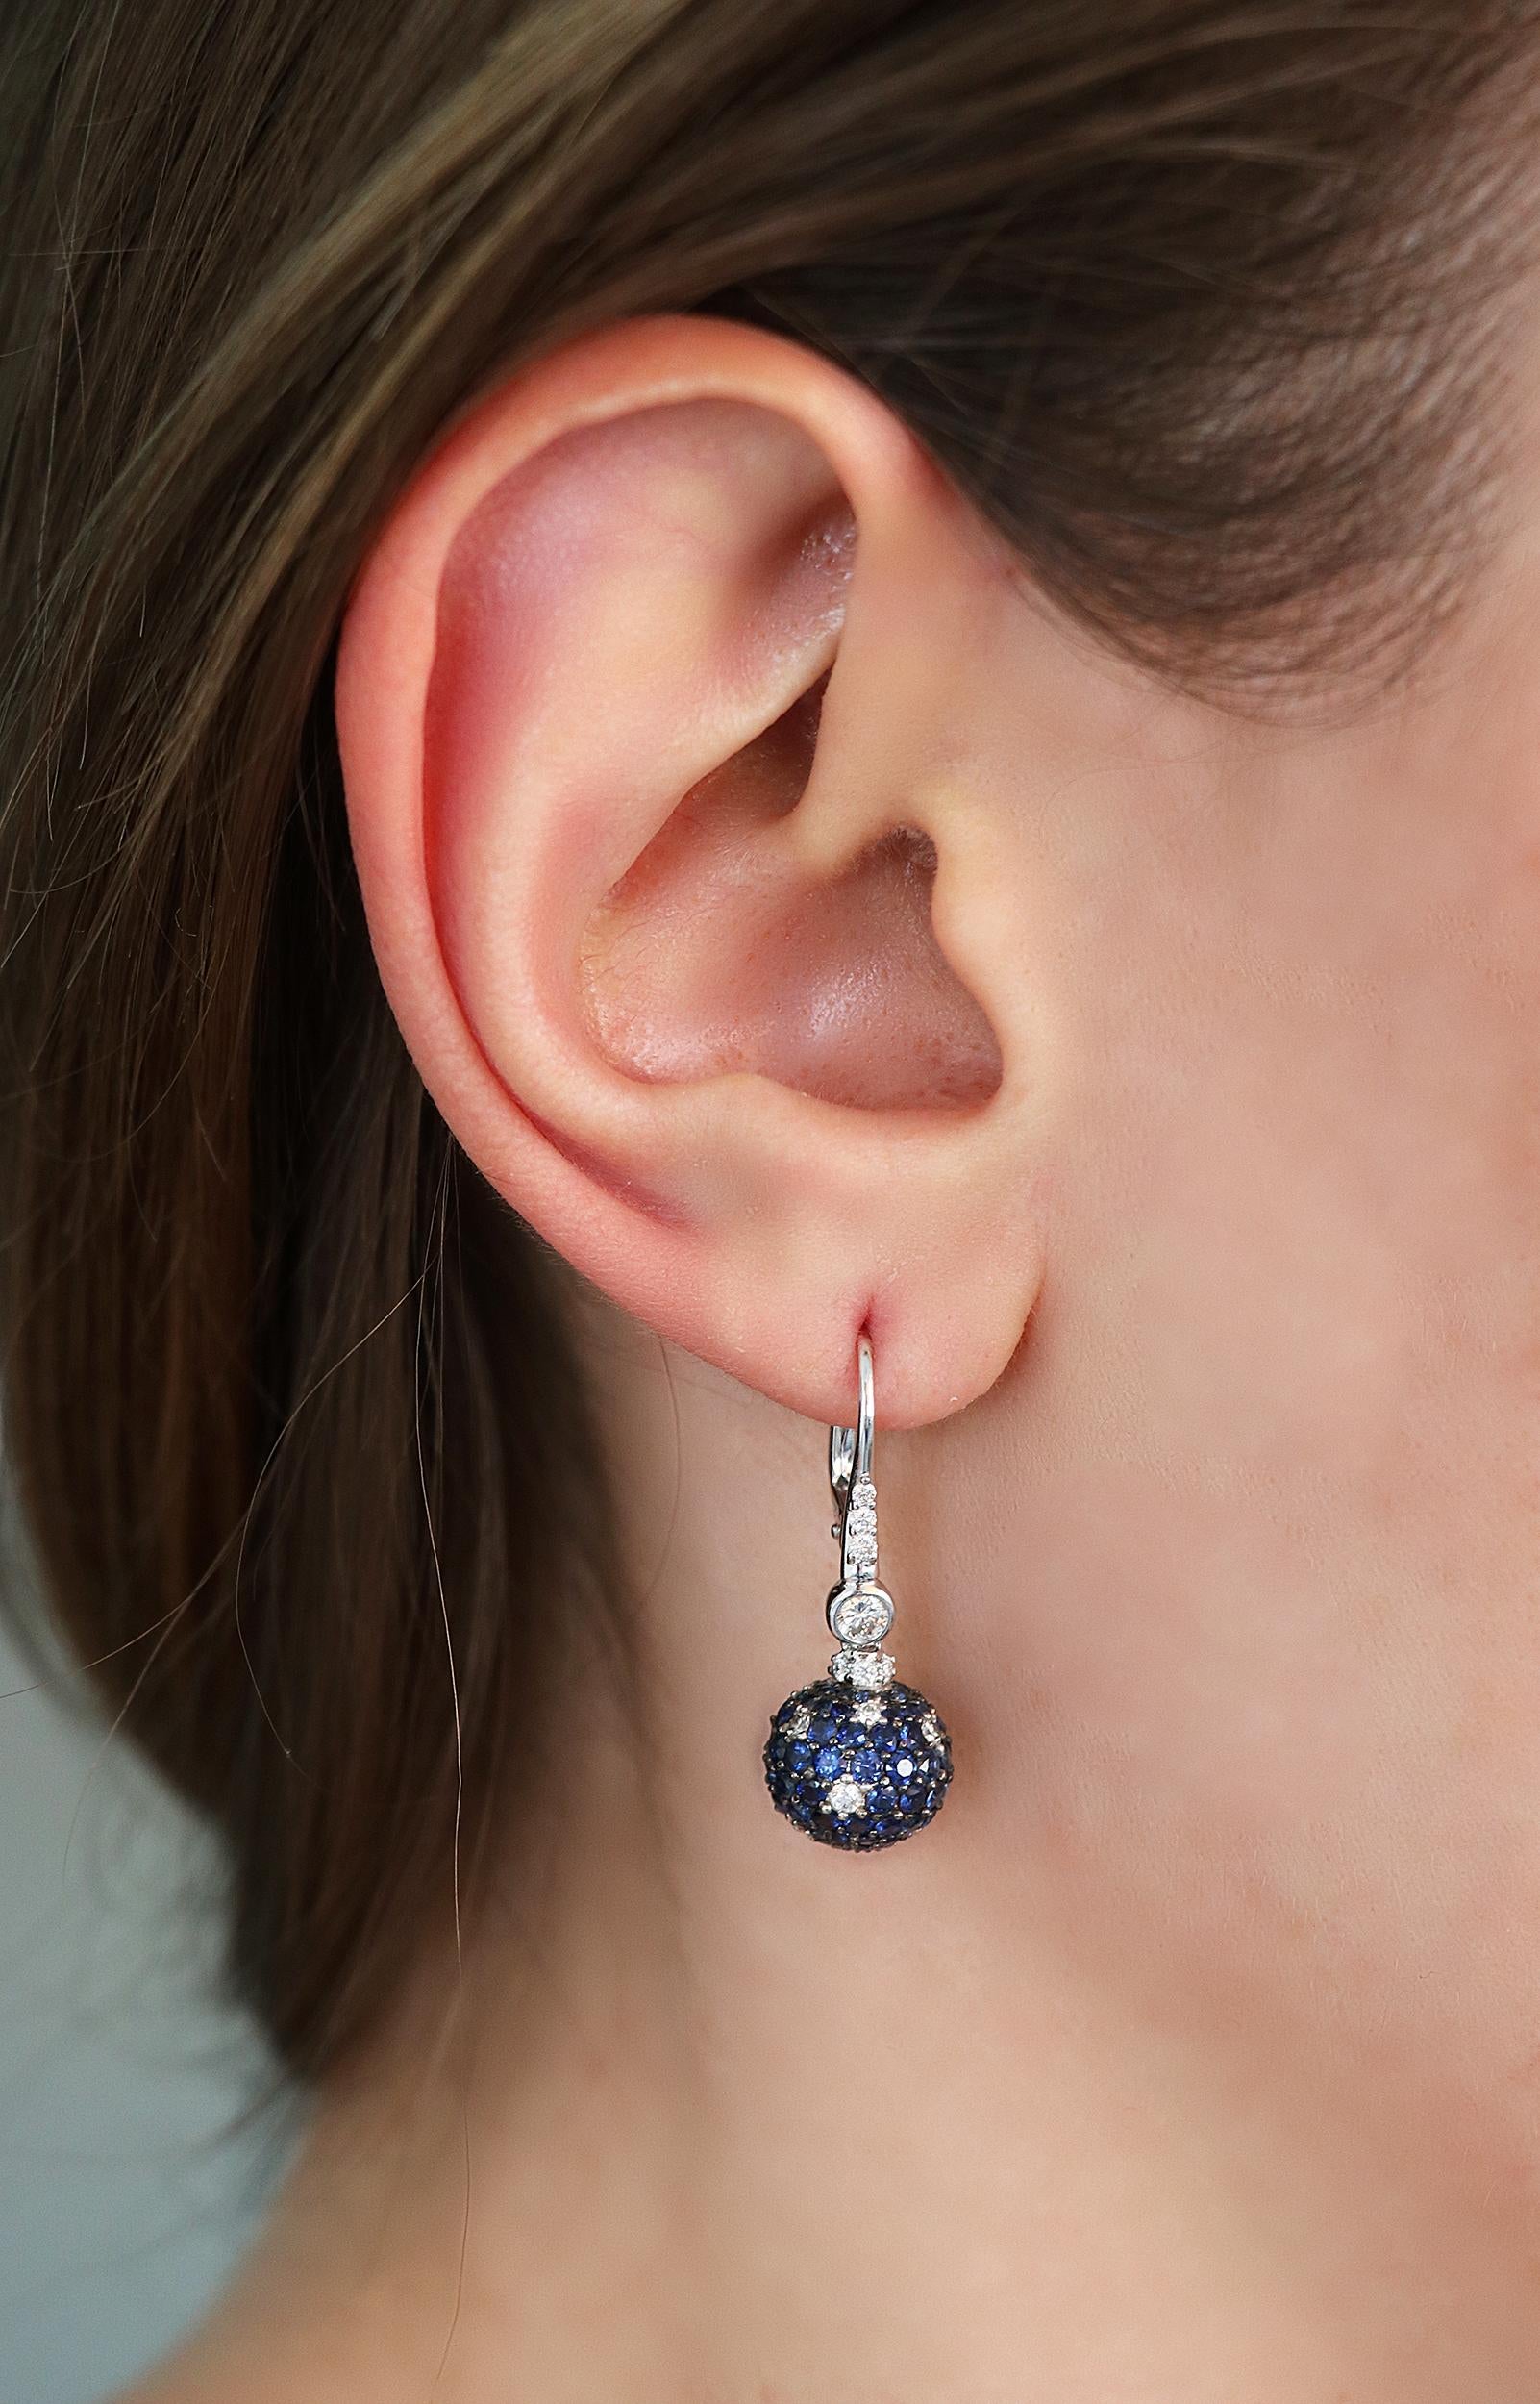 Ball shaped pendant earrings with 0.84 carats of round white diamonds and 4.24 carats of round cut blue sapphires. 
The weight of 18kt white gold is 4.70 grams. 
The earring has a total length of 3.00cm and the pendant has a diameter of